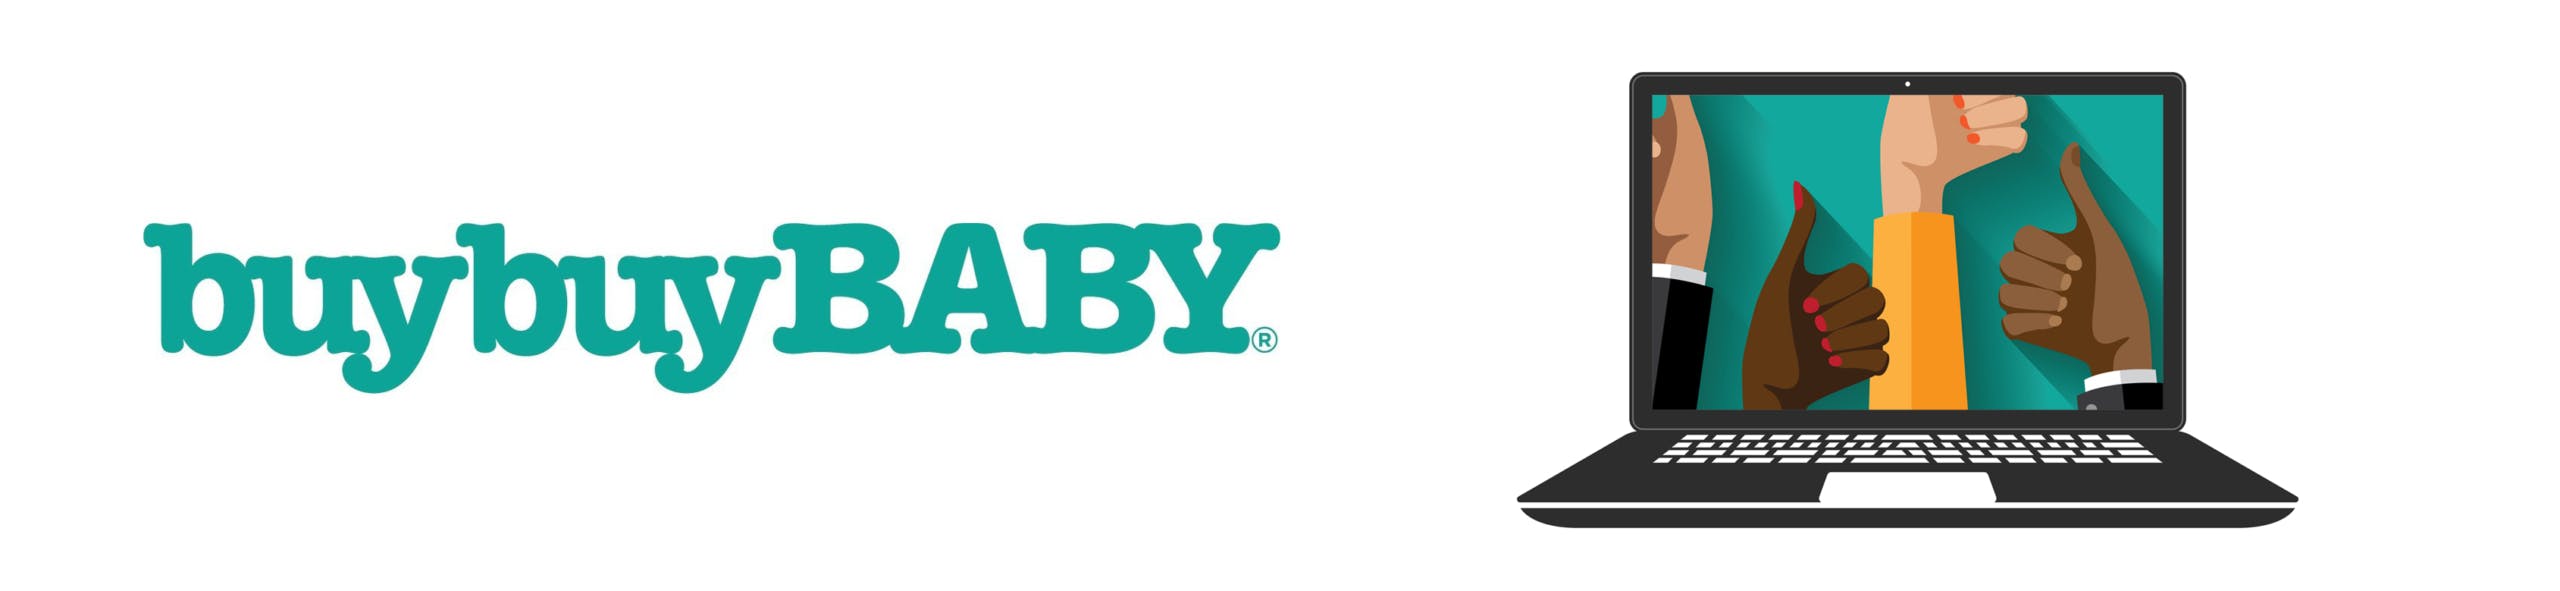 buybuyBaby logo next to a laptop with thumbs pointing up